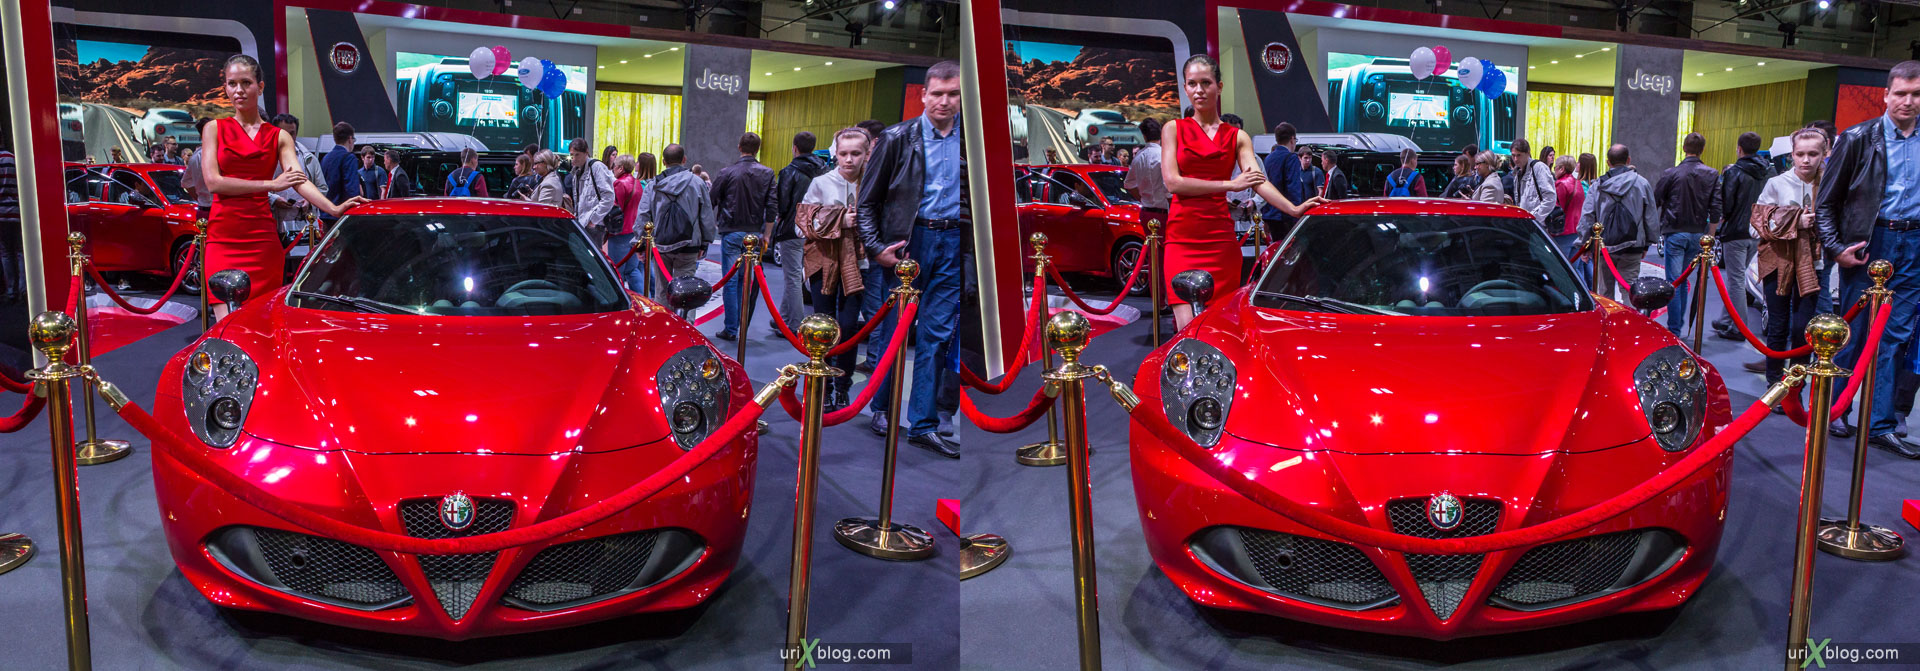 Alfa Romeo, Moscow International Automobile Salon 2014, MIAS 2014, girls, models, Crocus Expo, Moscow, Russia, 3D, stereo pair, cross-eyed, crossview, cross view stereo pair, stereoscopic, 2014